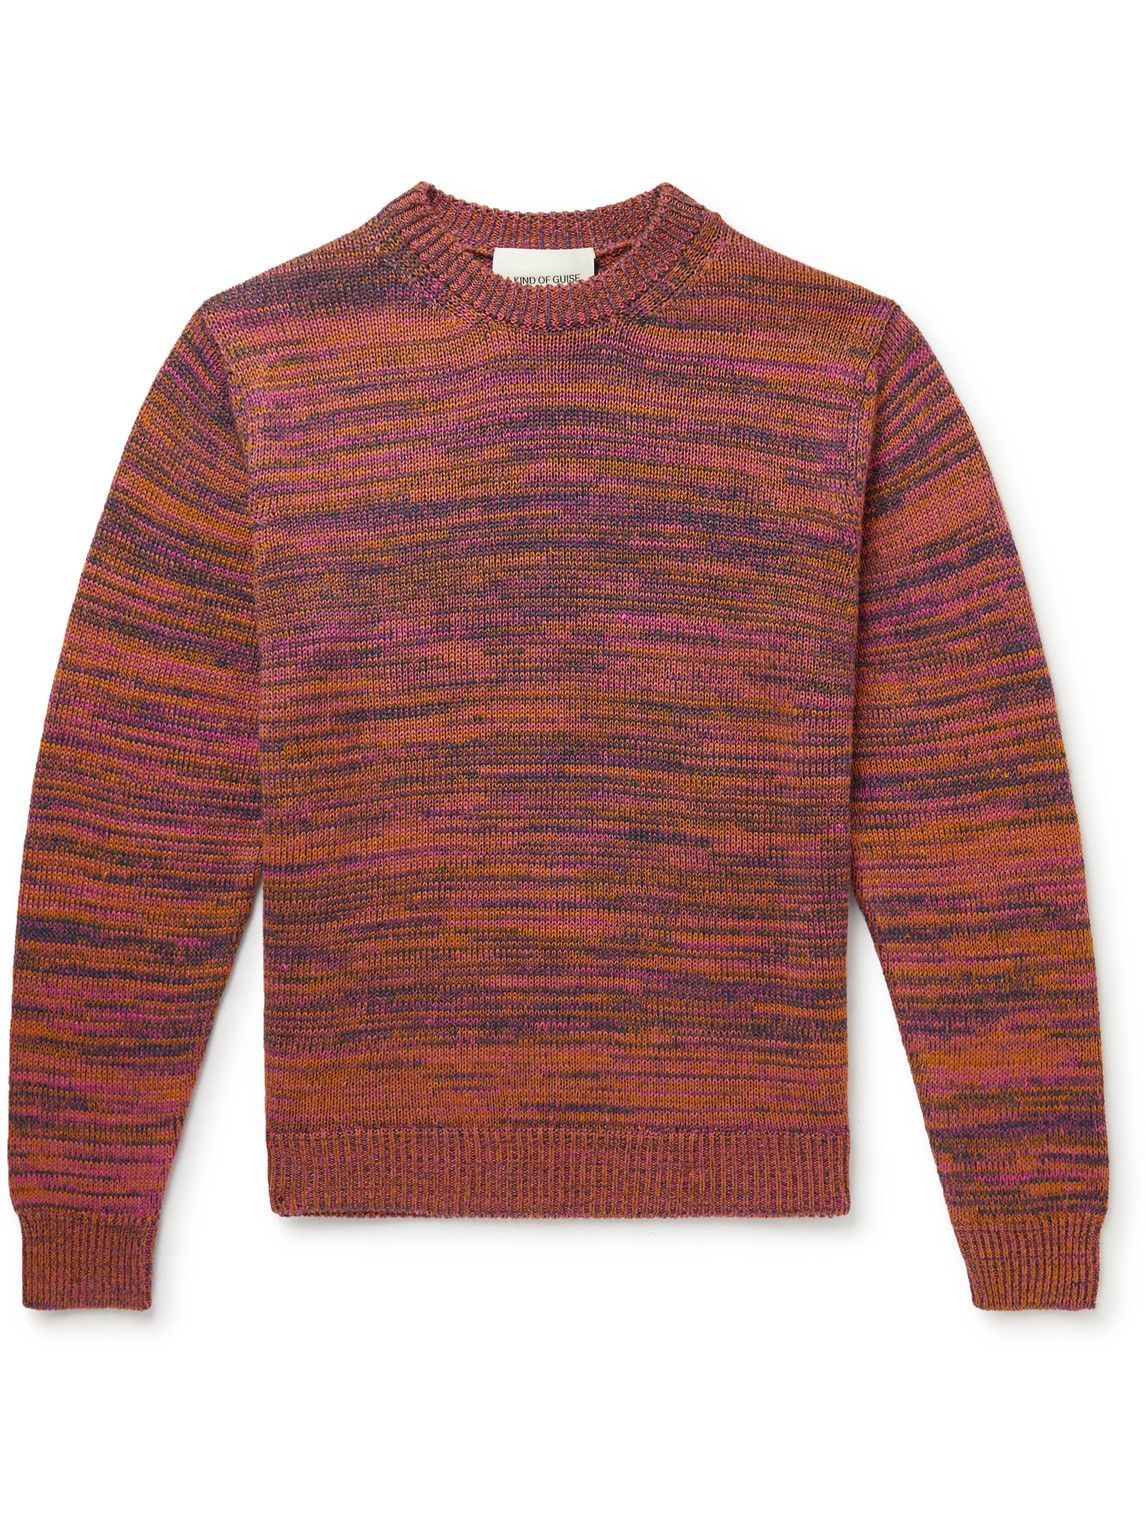 A Kind Of Guise - Polonia Linen and Merino Wool-Blend Sweater - Orange ...